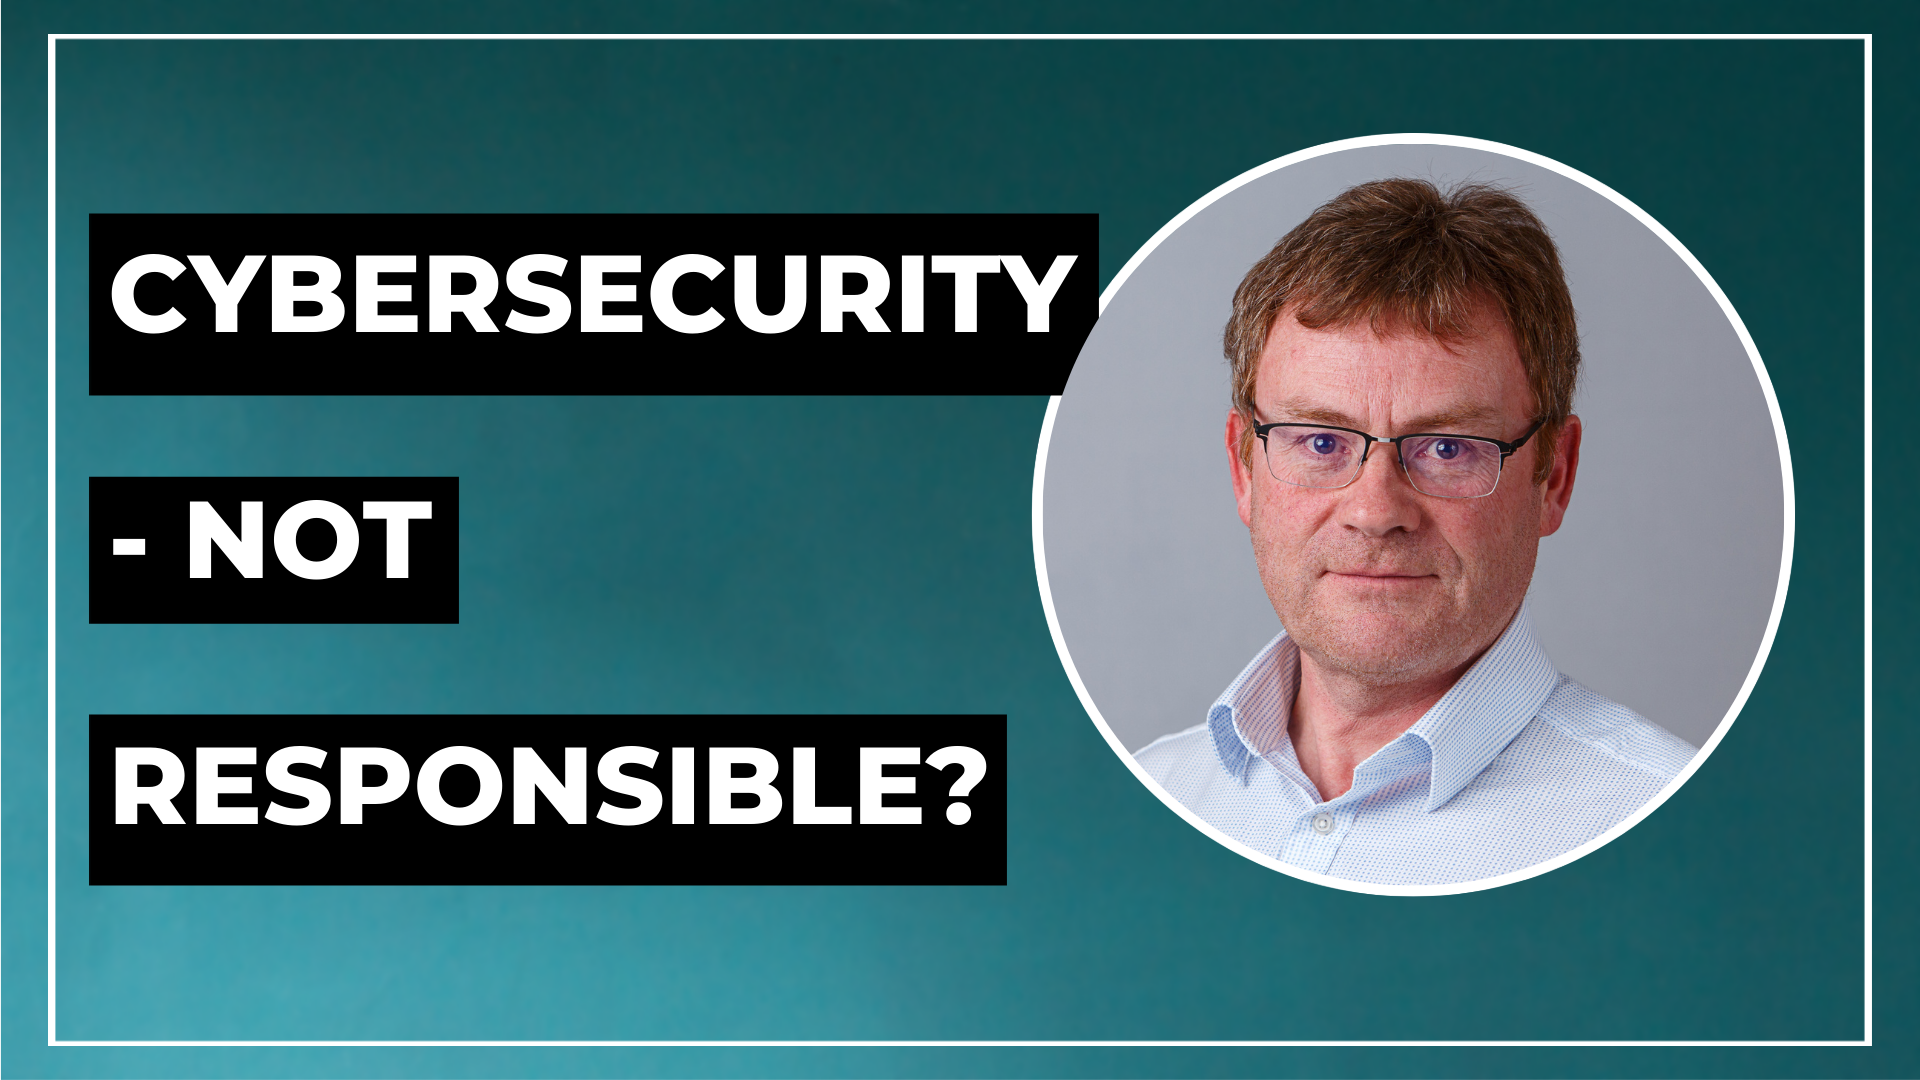 We're not responsible for cybersecurity - 15 Dangerous Cybersecurity Myths - Day 3